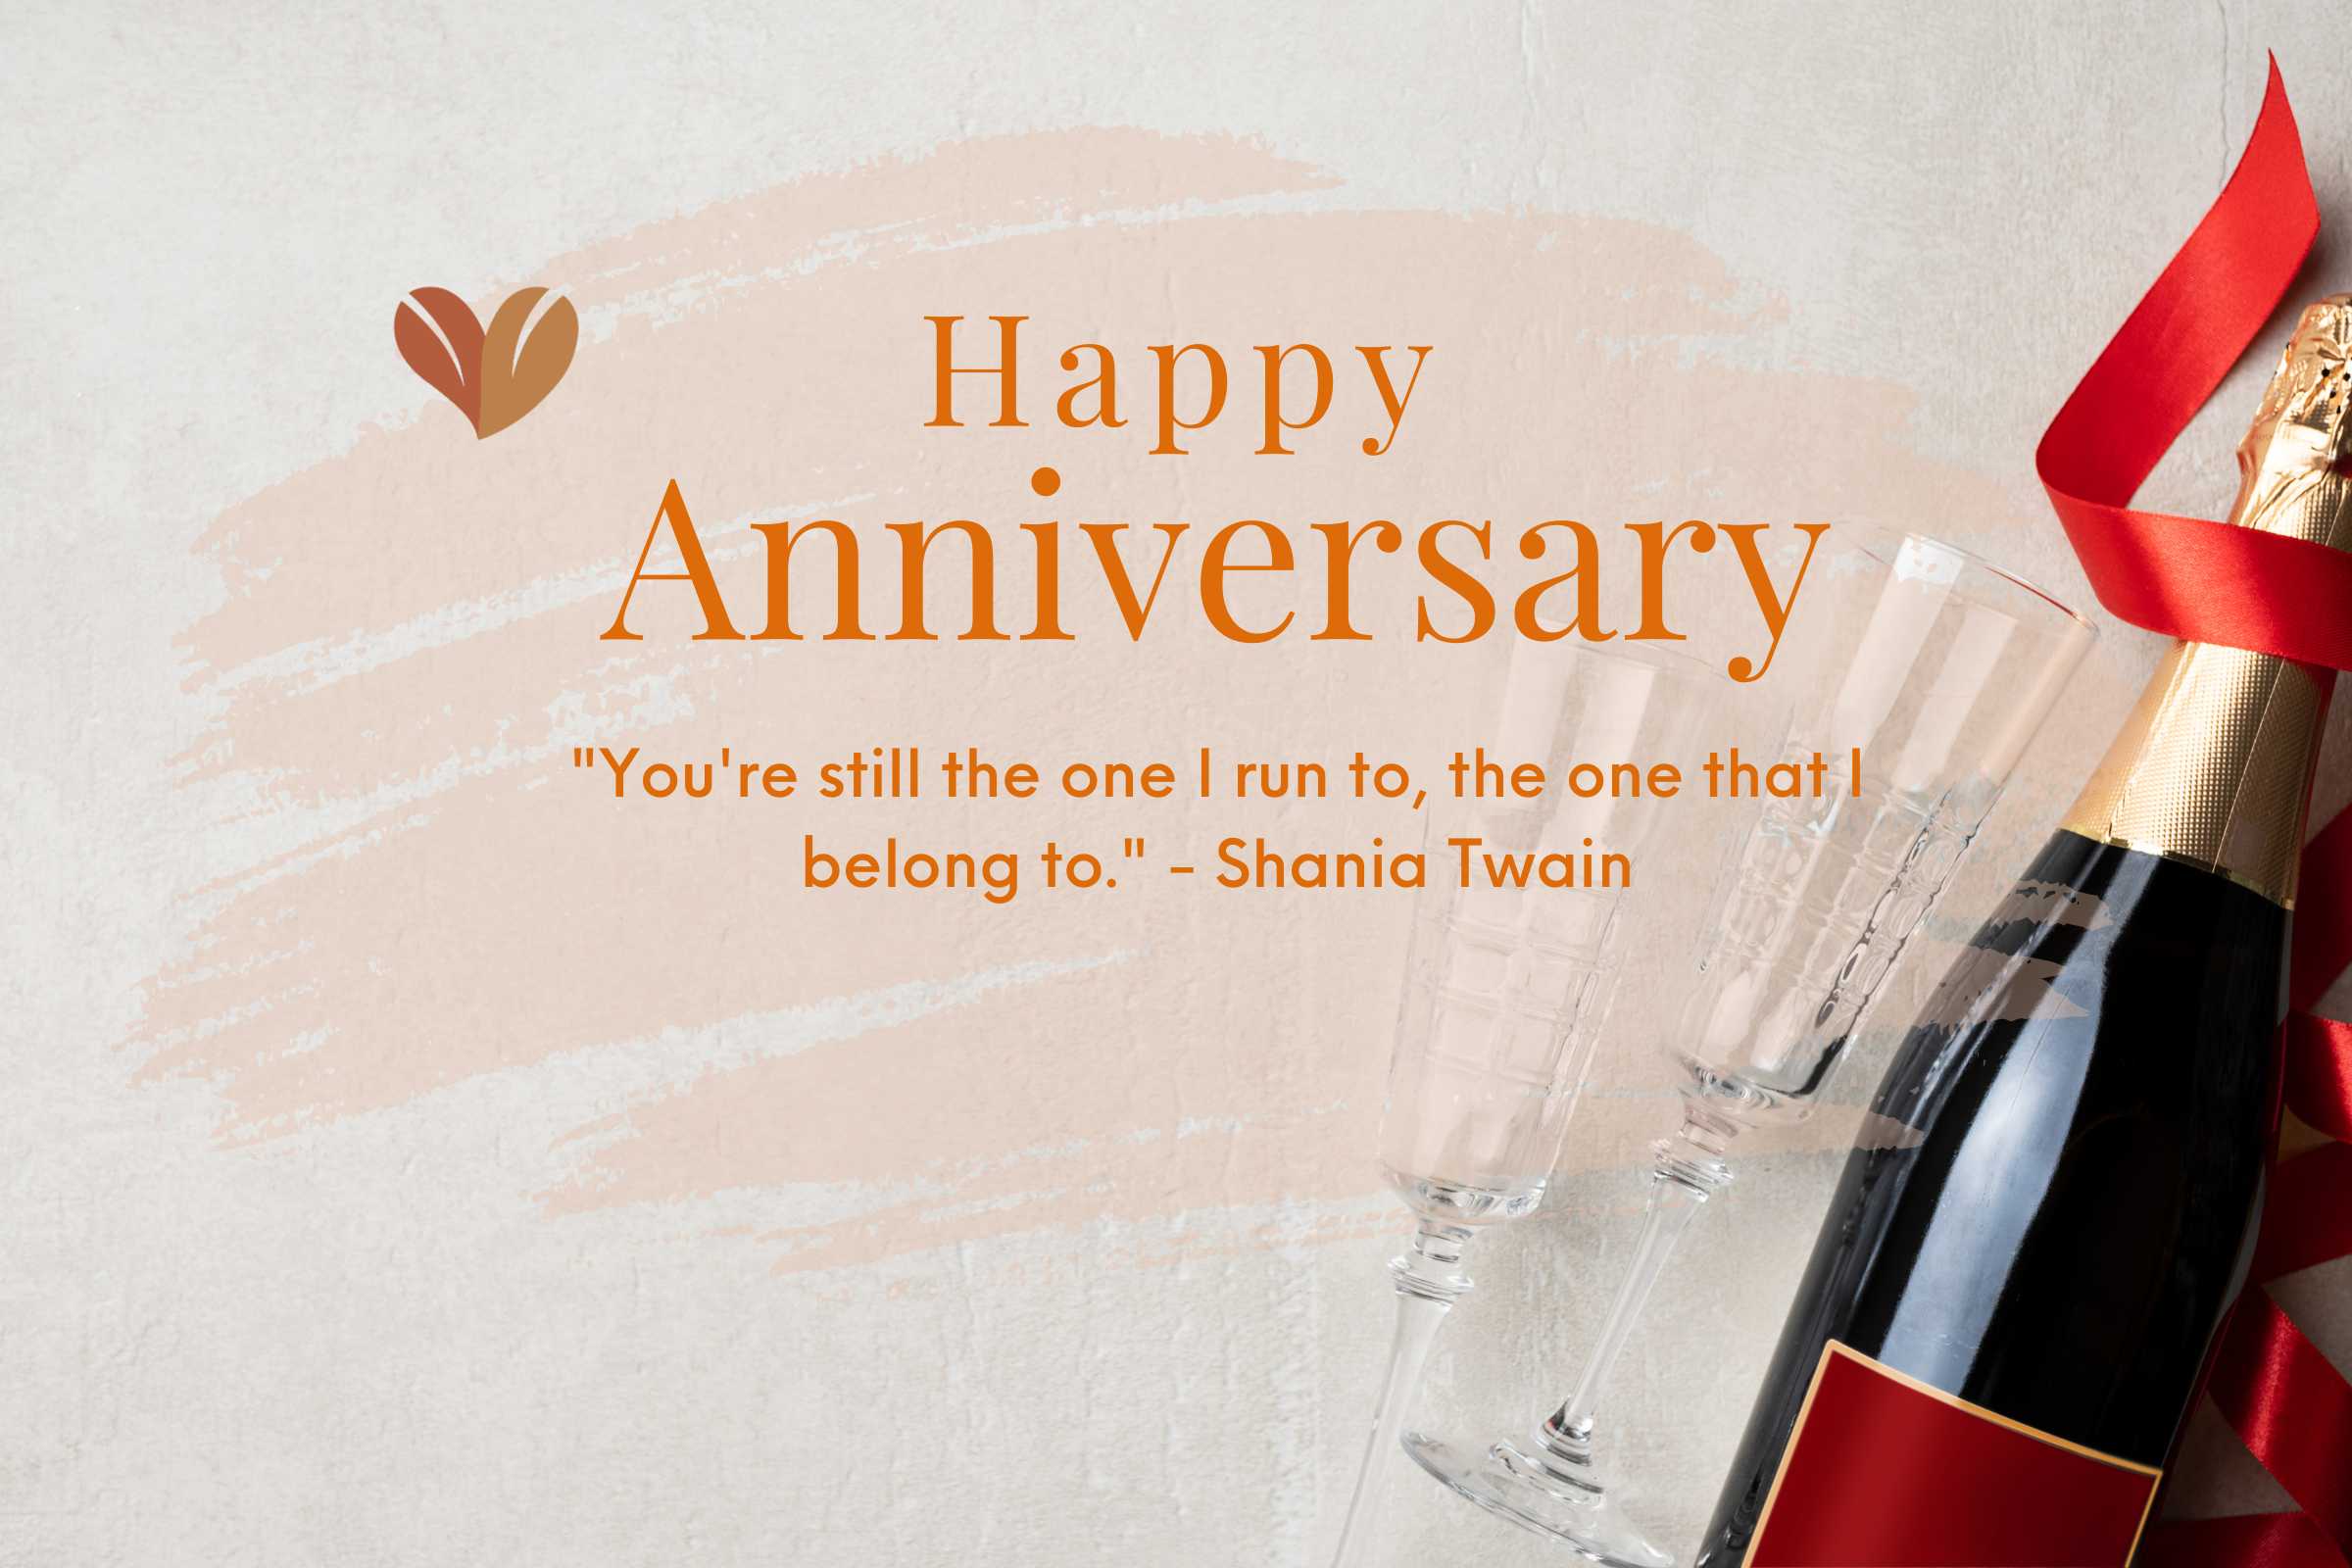 How sweet it is to be loved by you- 1 year anniversary quotes